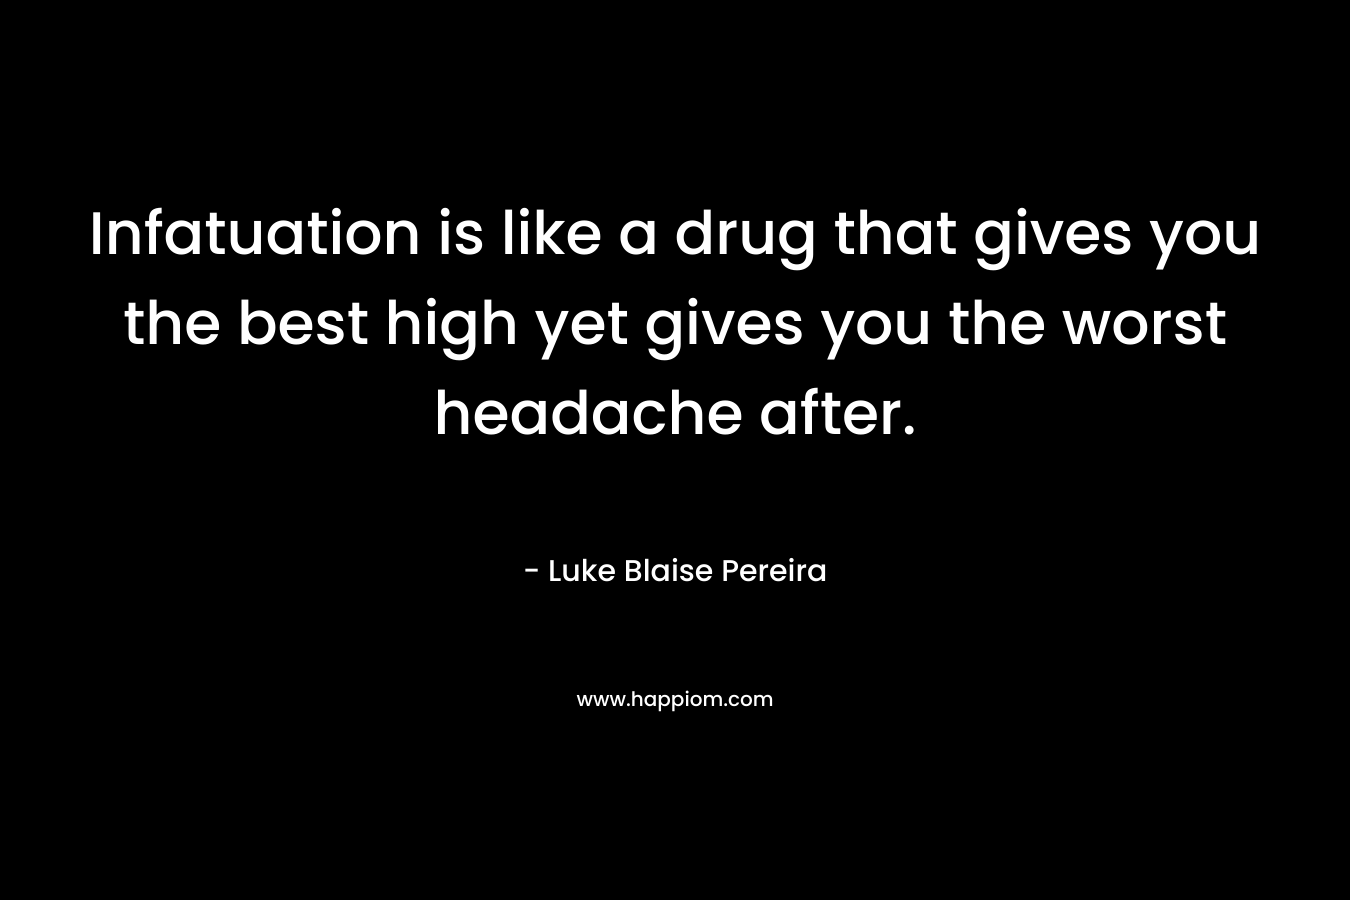 Infatuation is like a drug that gives you the best high yet gives you the worst headache after. – Luke Blaise Pereira